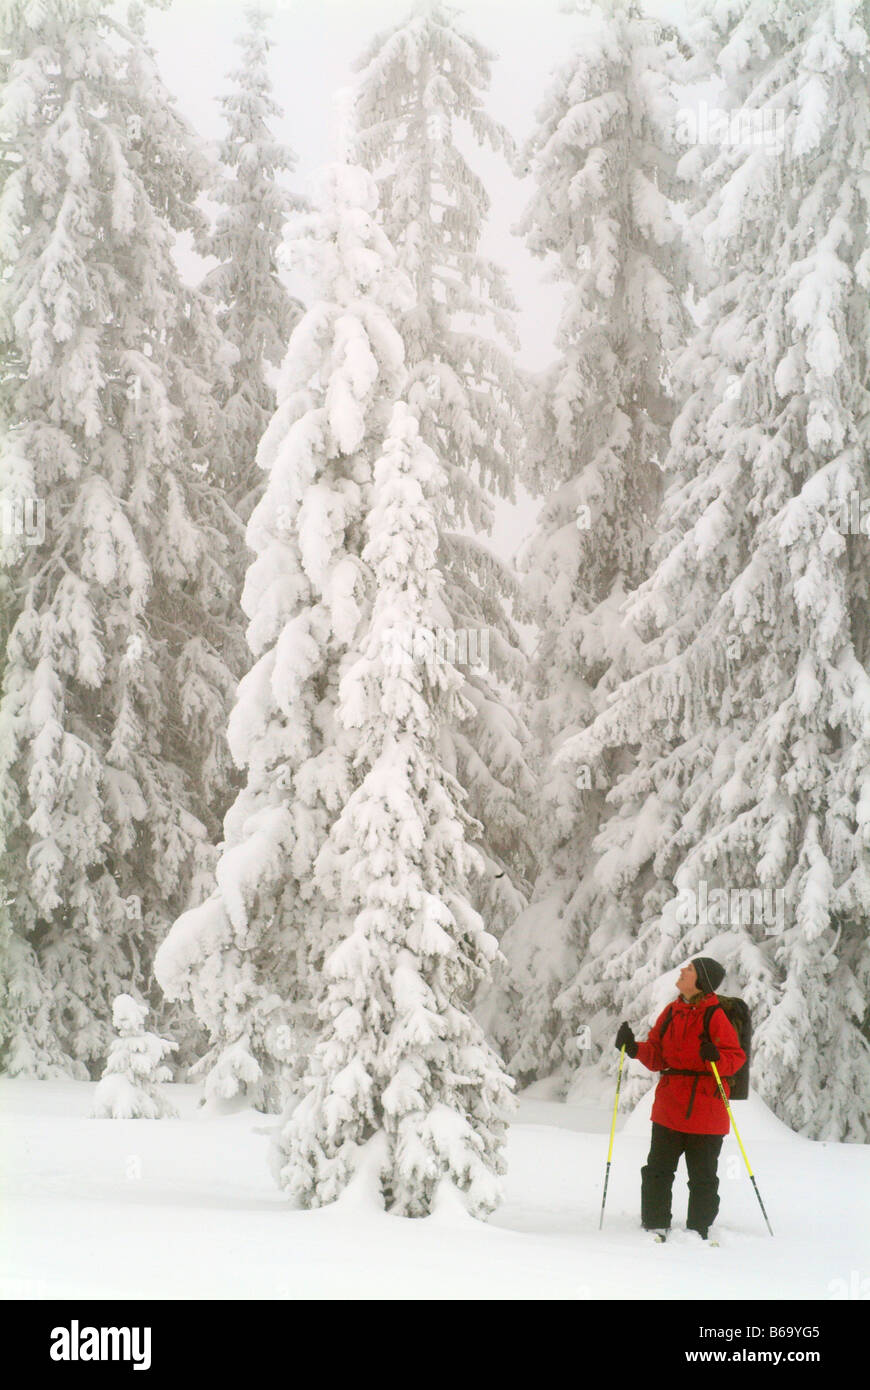 A Cross Country Skier Looking Up At Snow Covered Trees in Sweden Stock Photo